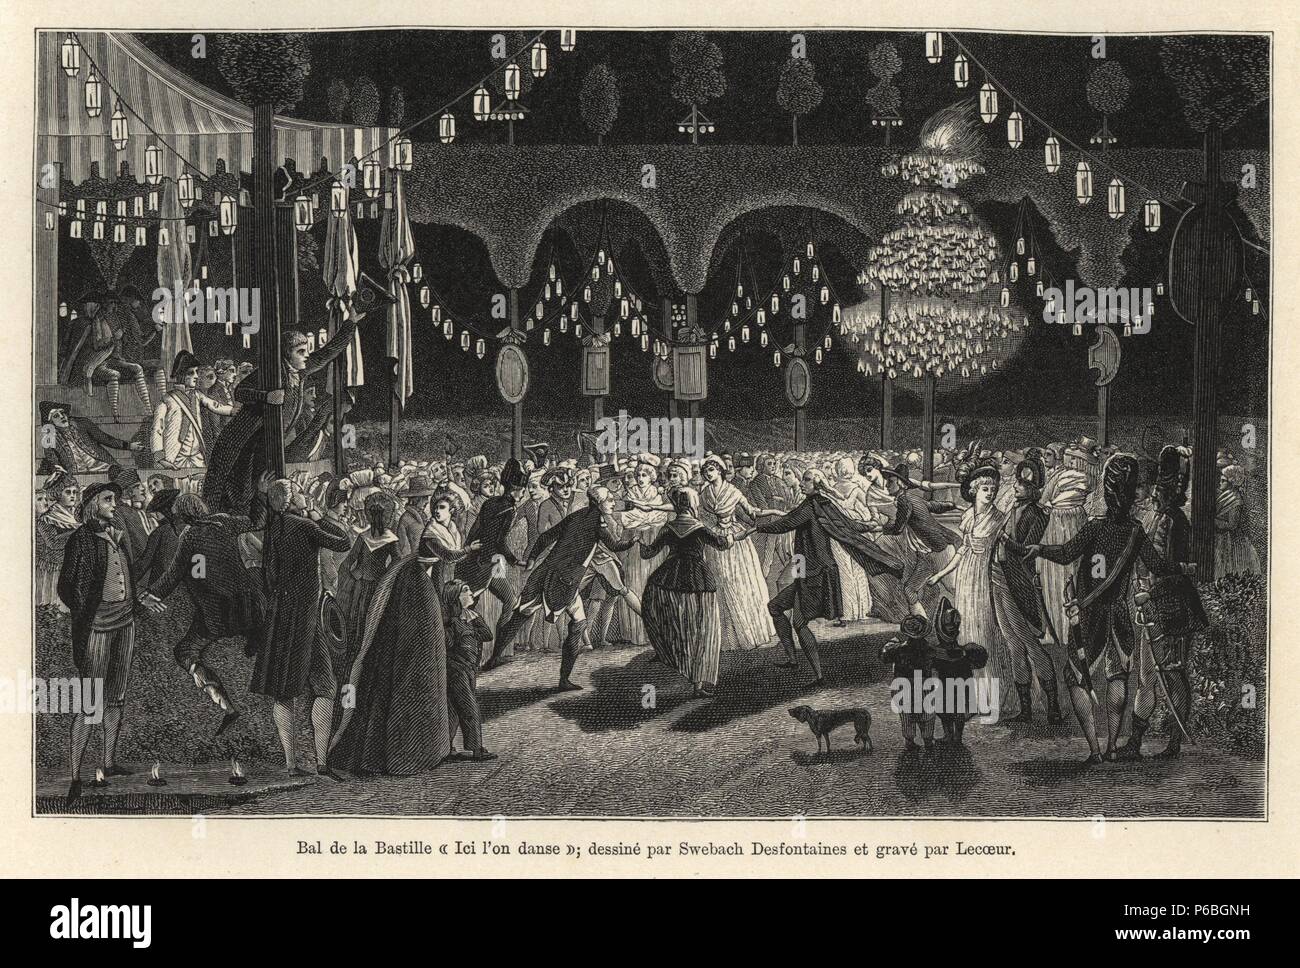 Nocturnal dance at the Bal de la Bastille, circa 1800. Crowds of Parisians dance under lanterns in trees. Illustration drawn by Swebach Desfontaines and engraved by Lecoeur. Engraving from Paul Lacroix's 'Directoire, Consulat et Empire,' Paris, 1884. Stock Photo